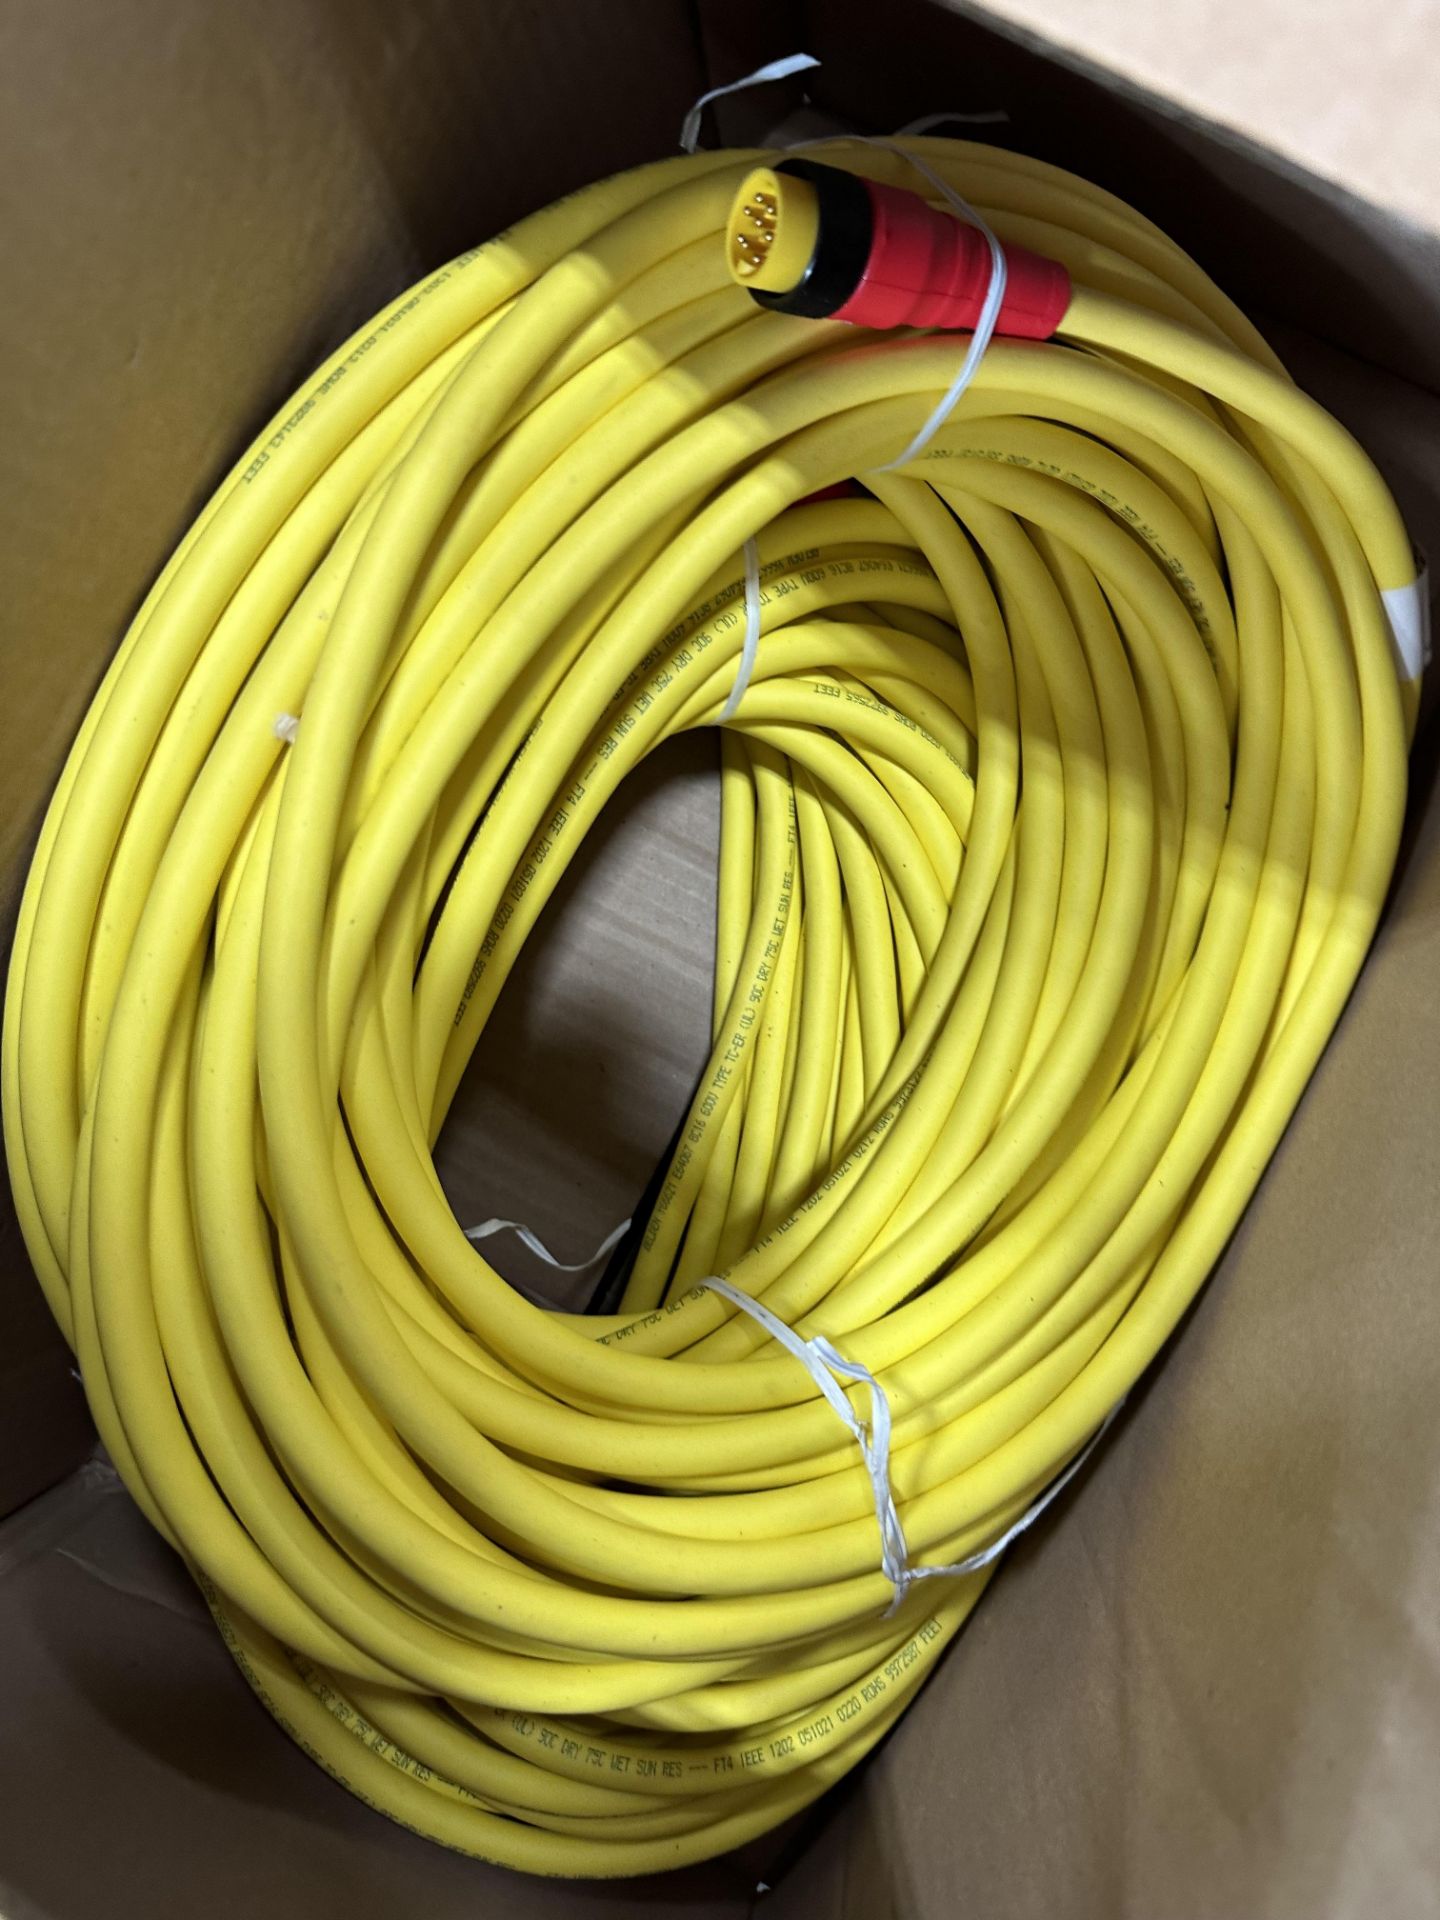 New Panduit 3ft Ethernet Cable and Turck 8P Male Cable - Image 5 of 8